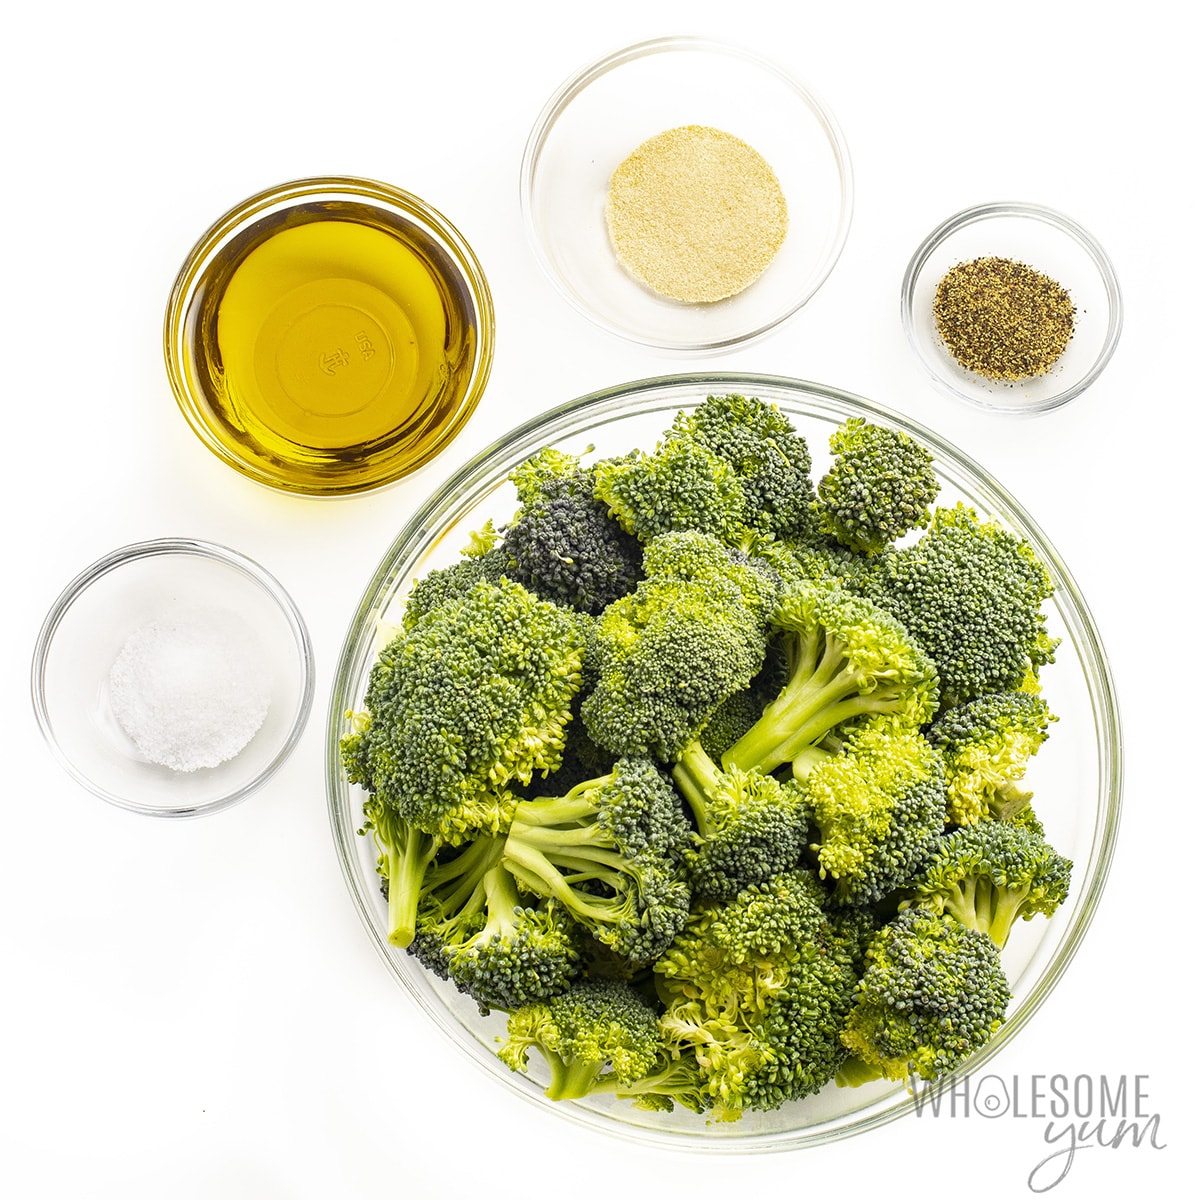 Ingredients for roasting broccoli.